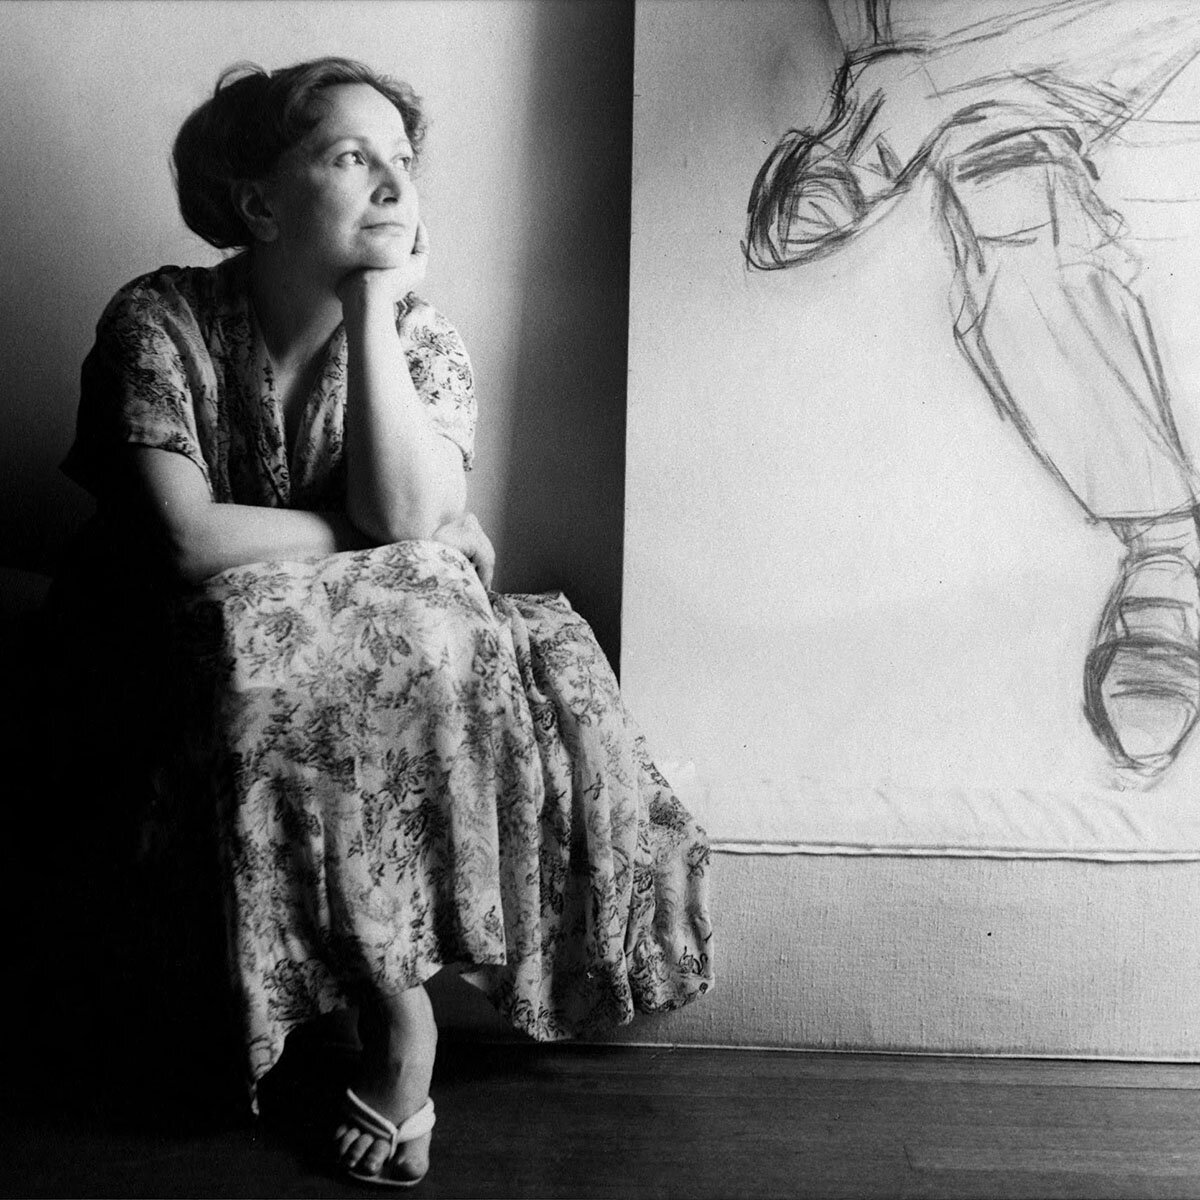  Portrait of Hedda Sterne by the Waintrob Brothers, c. 1960 